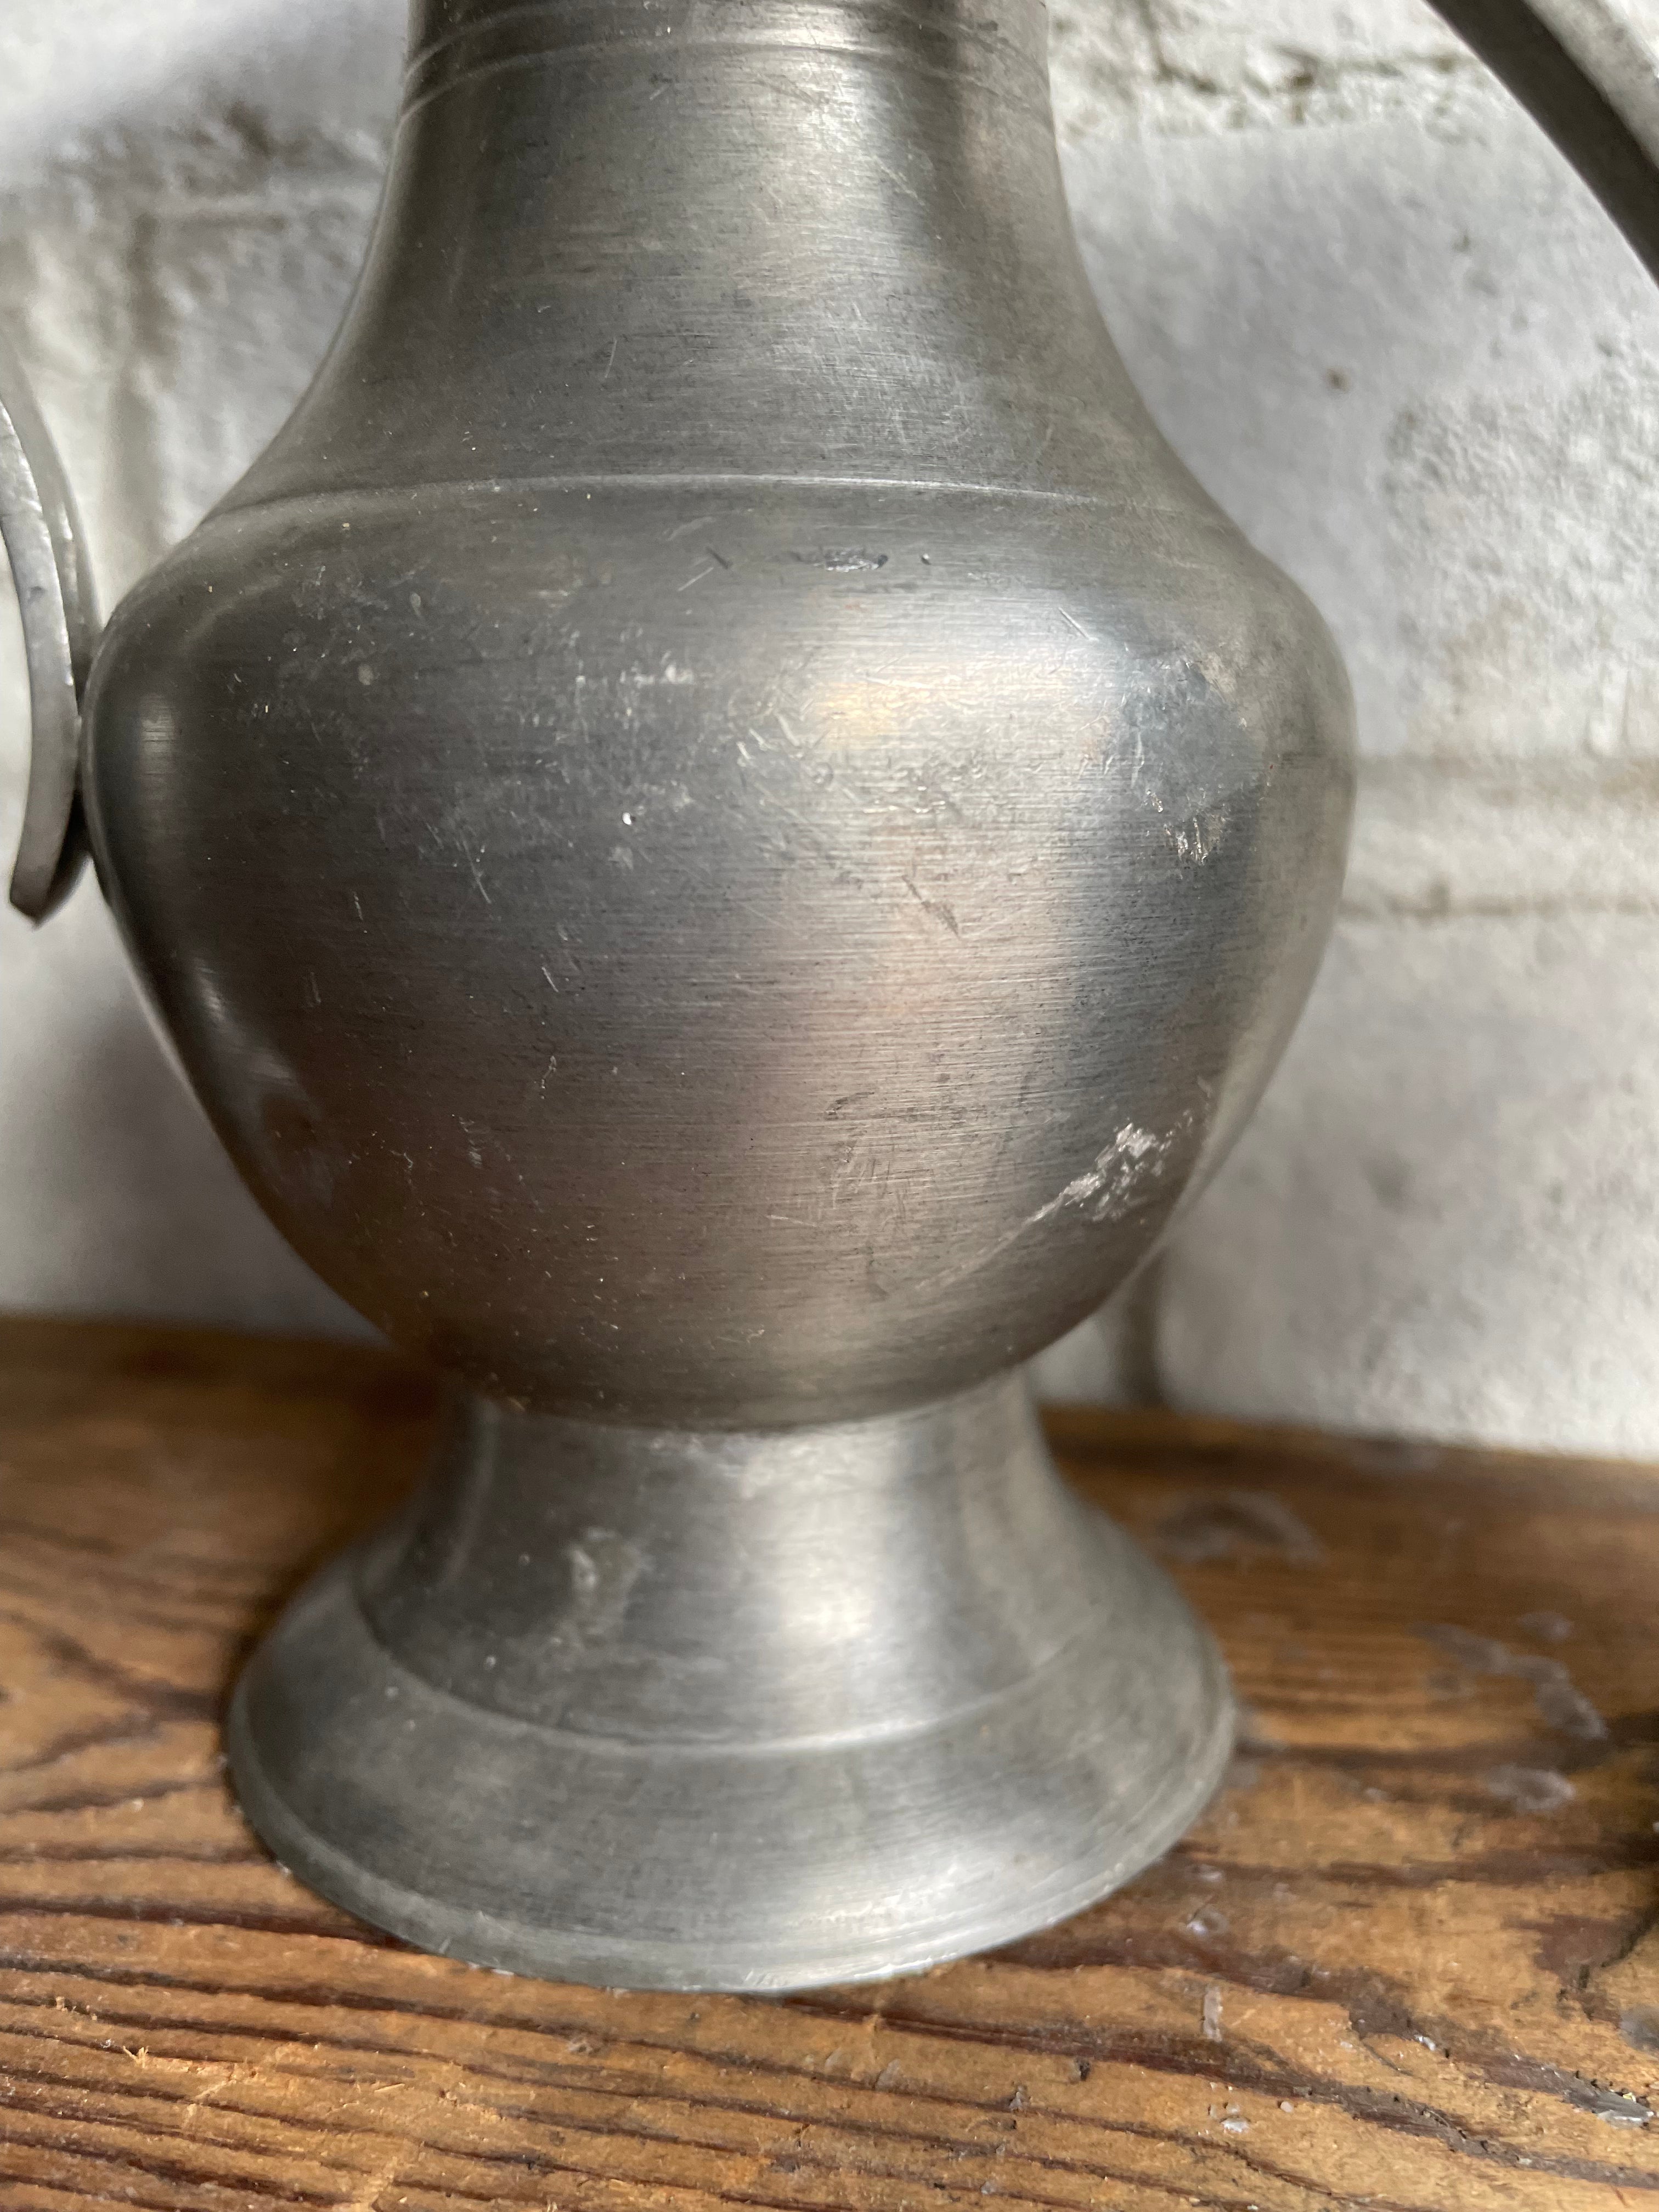 Vintage French Pewter Jugs: Set of 7